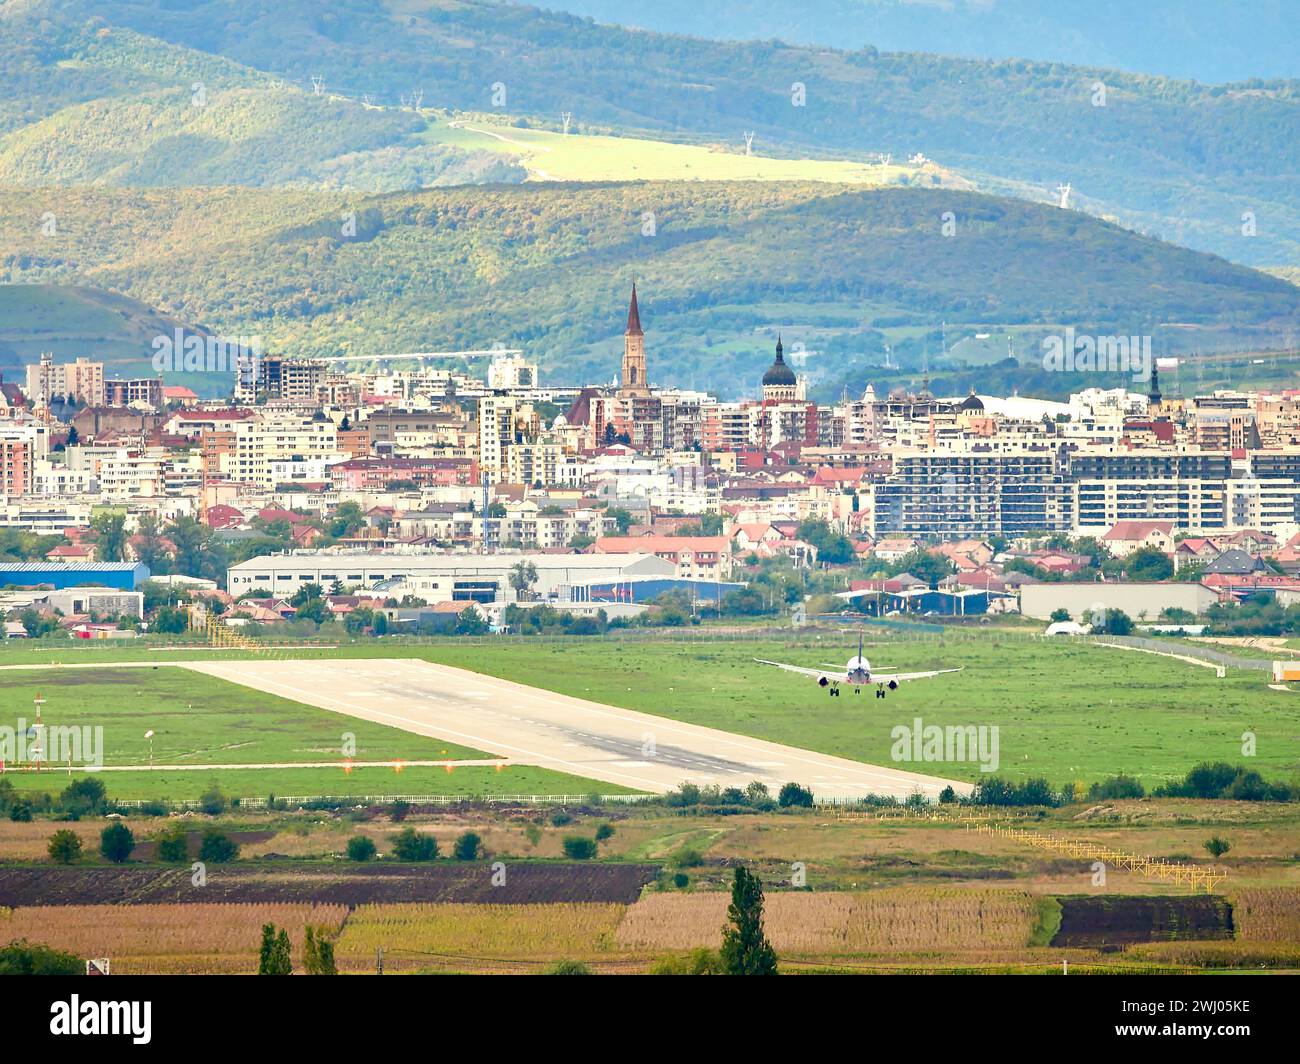 Avram Iancu airport runway in Cluj with plane landing. East side view of Cluj Napoca. Dramatic sunlight, different view over the city. Stock Photo